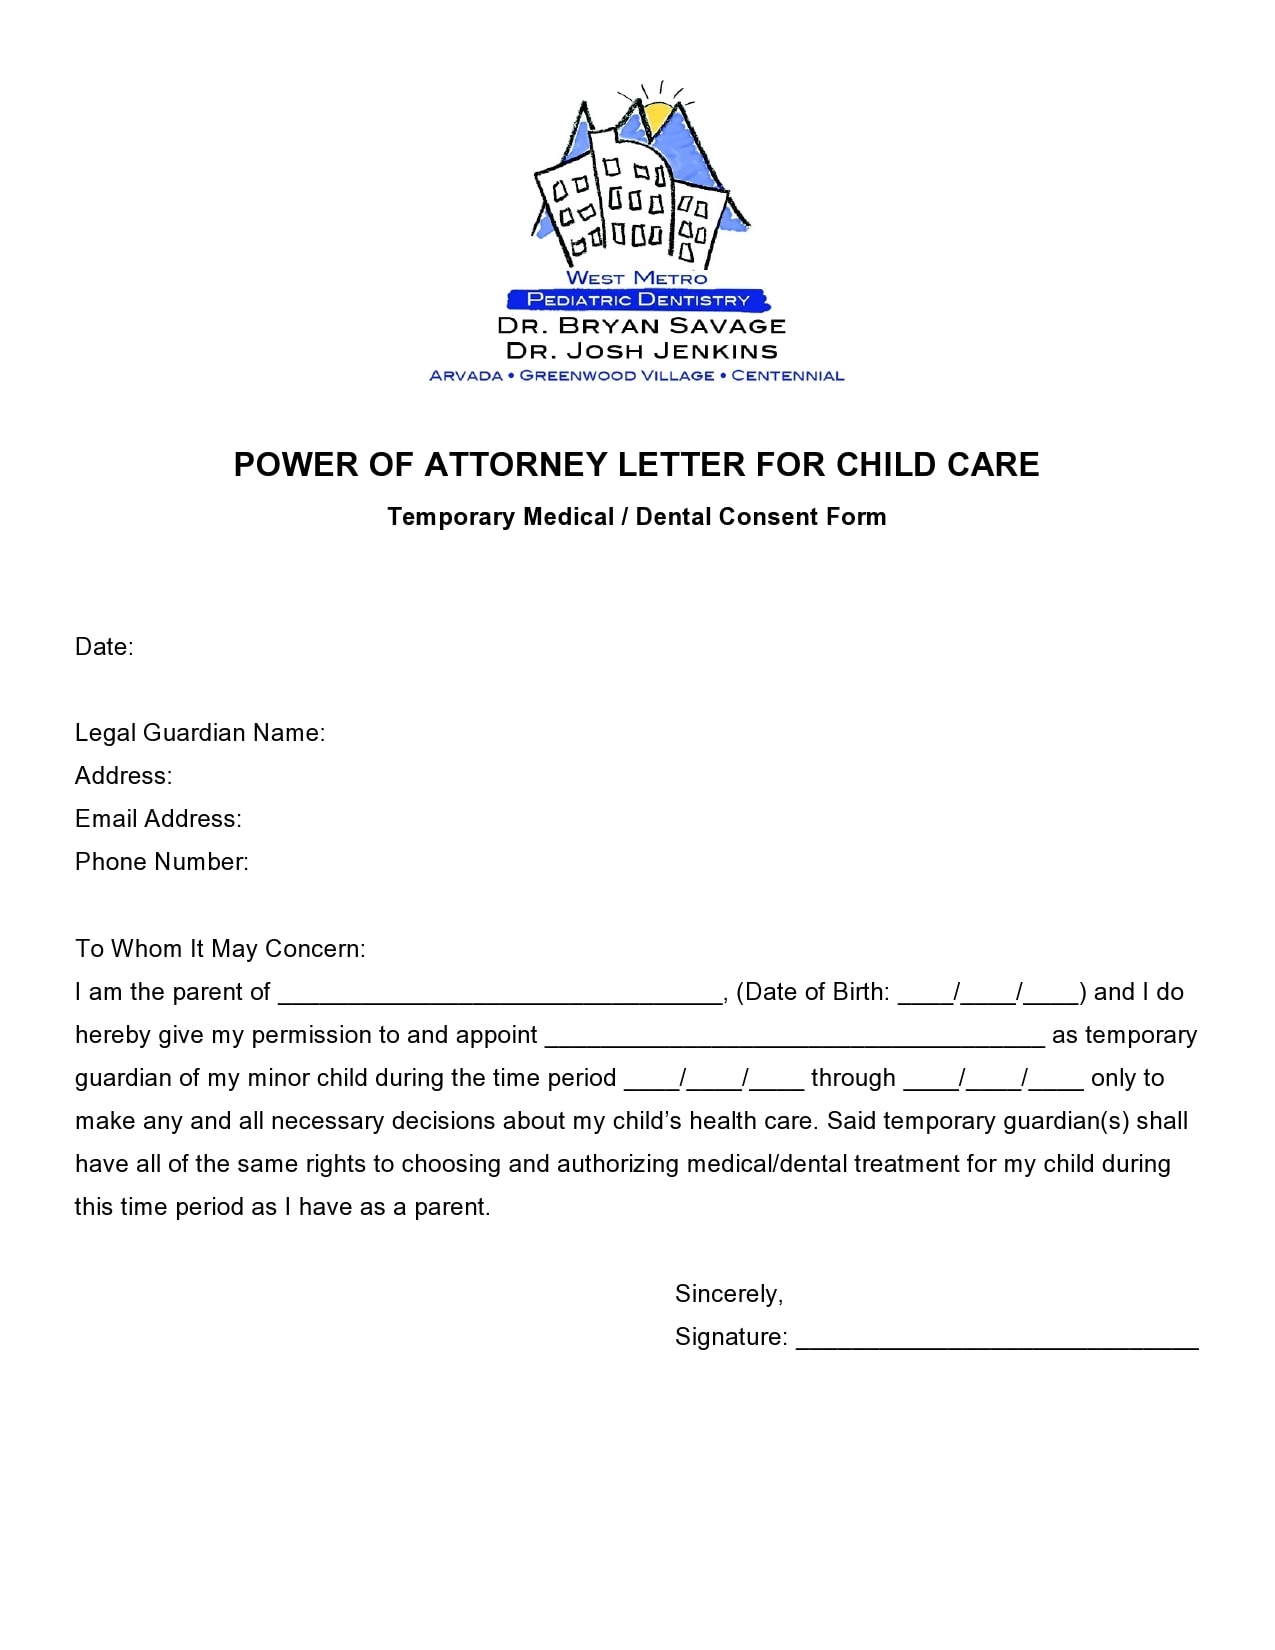 27-professional-power-of-attorney-letters-examples